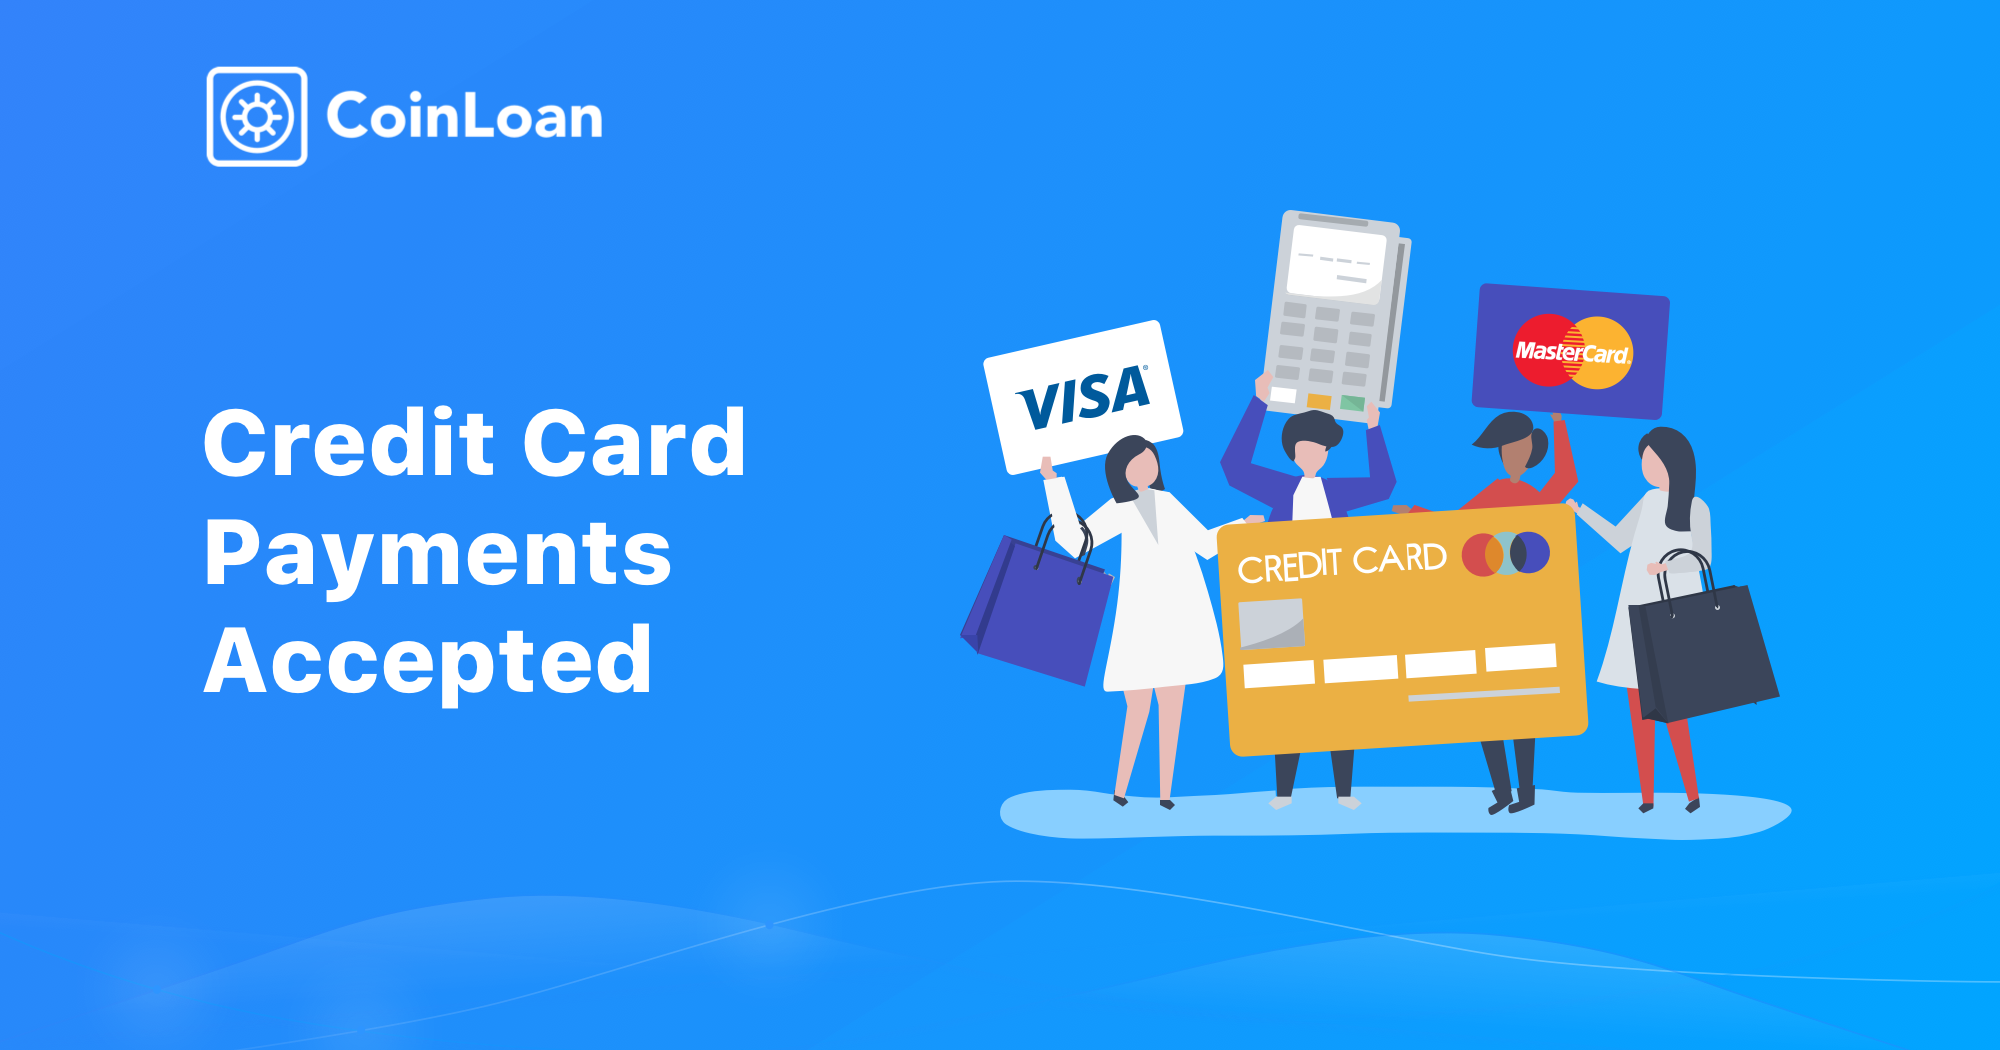 CoinLoan Enables Visa and MasterCard Payments